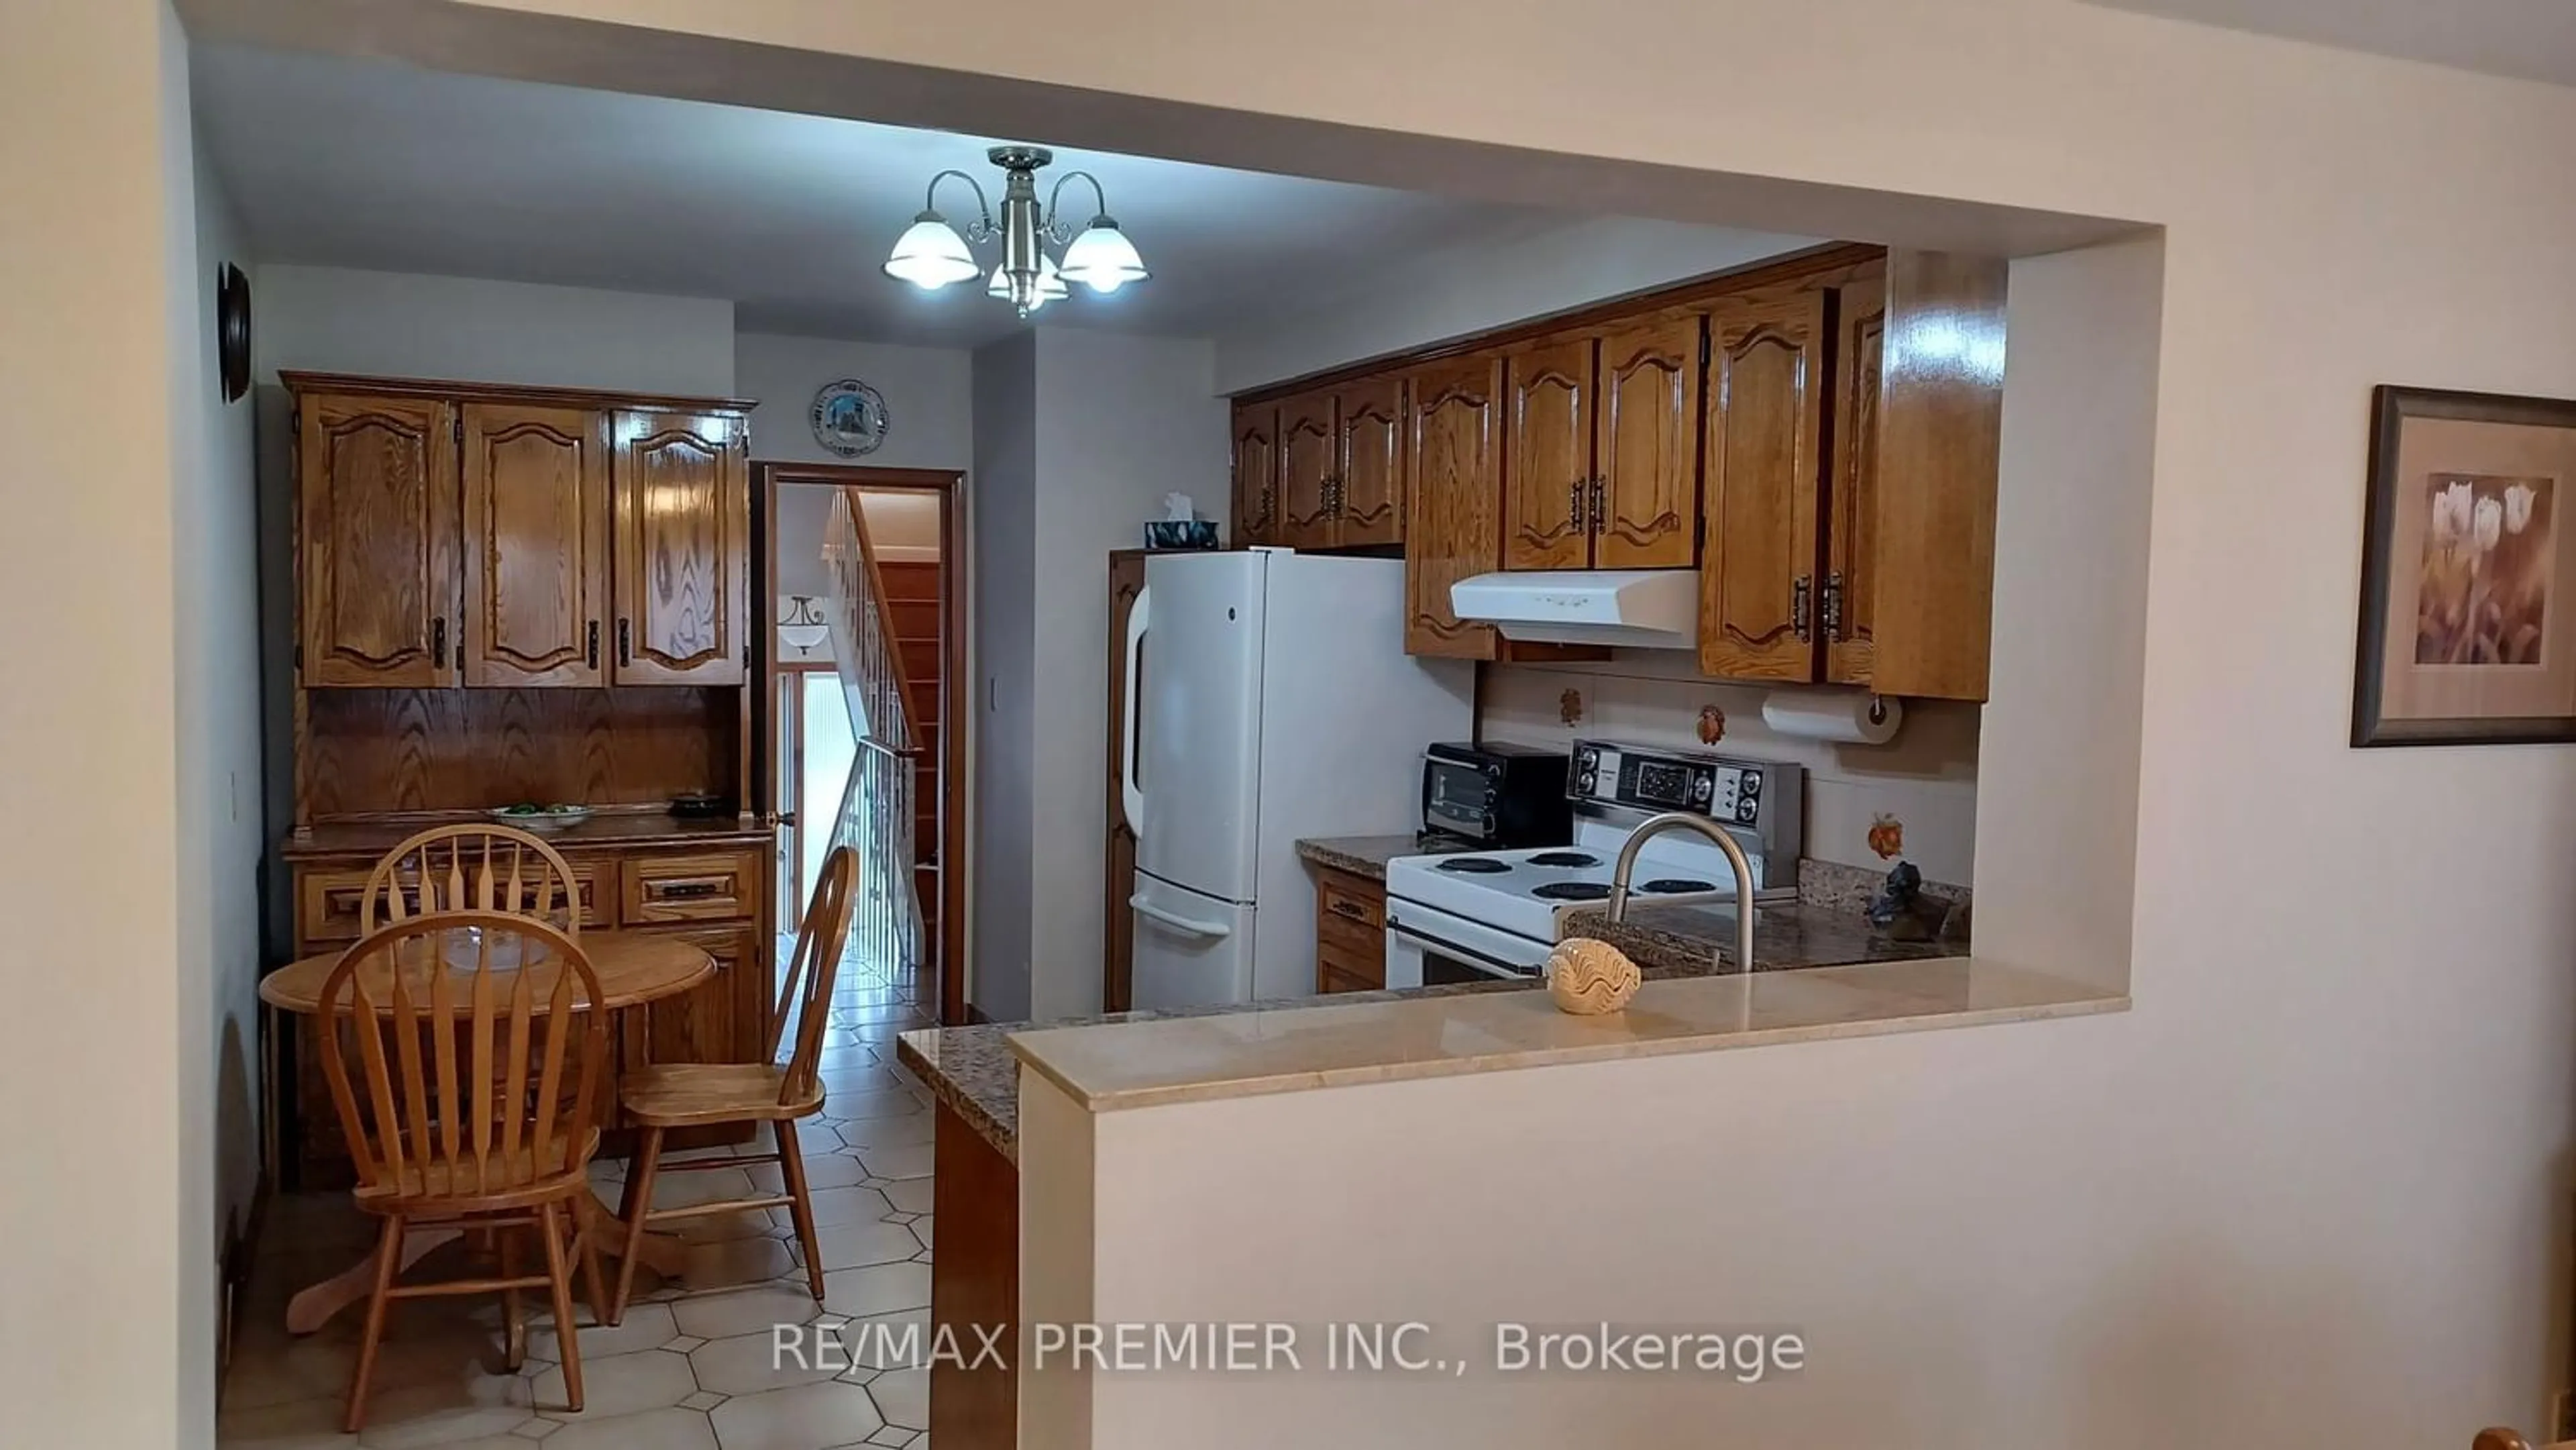 Standard kitchen for 83 Dombey Rd, Toronto Ontario M3L 1P1